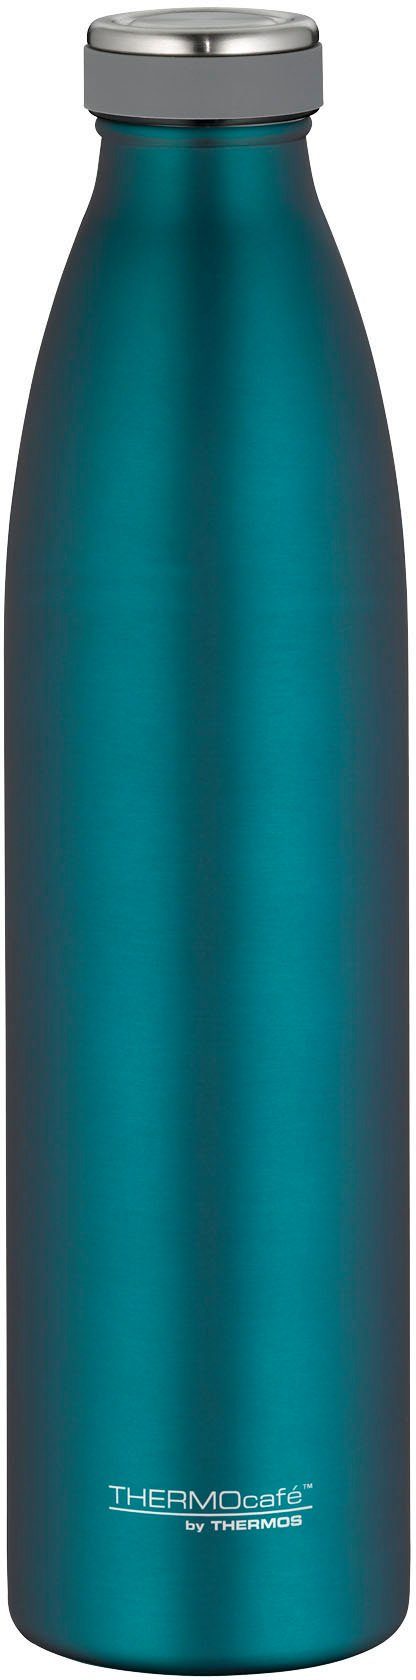 THERMOS Thermoflasche Thermo Cafe petrol